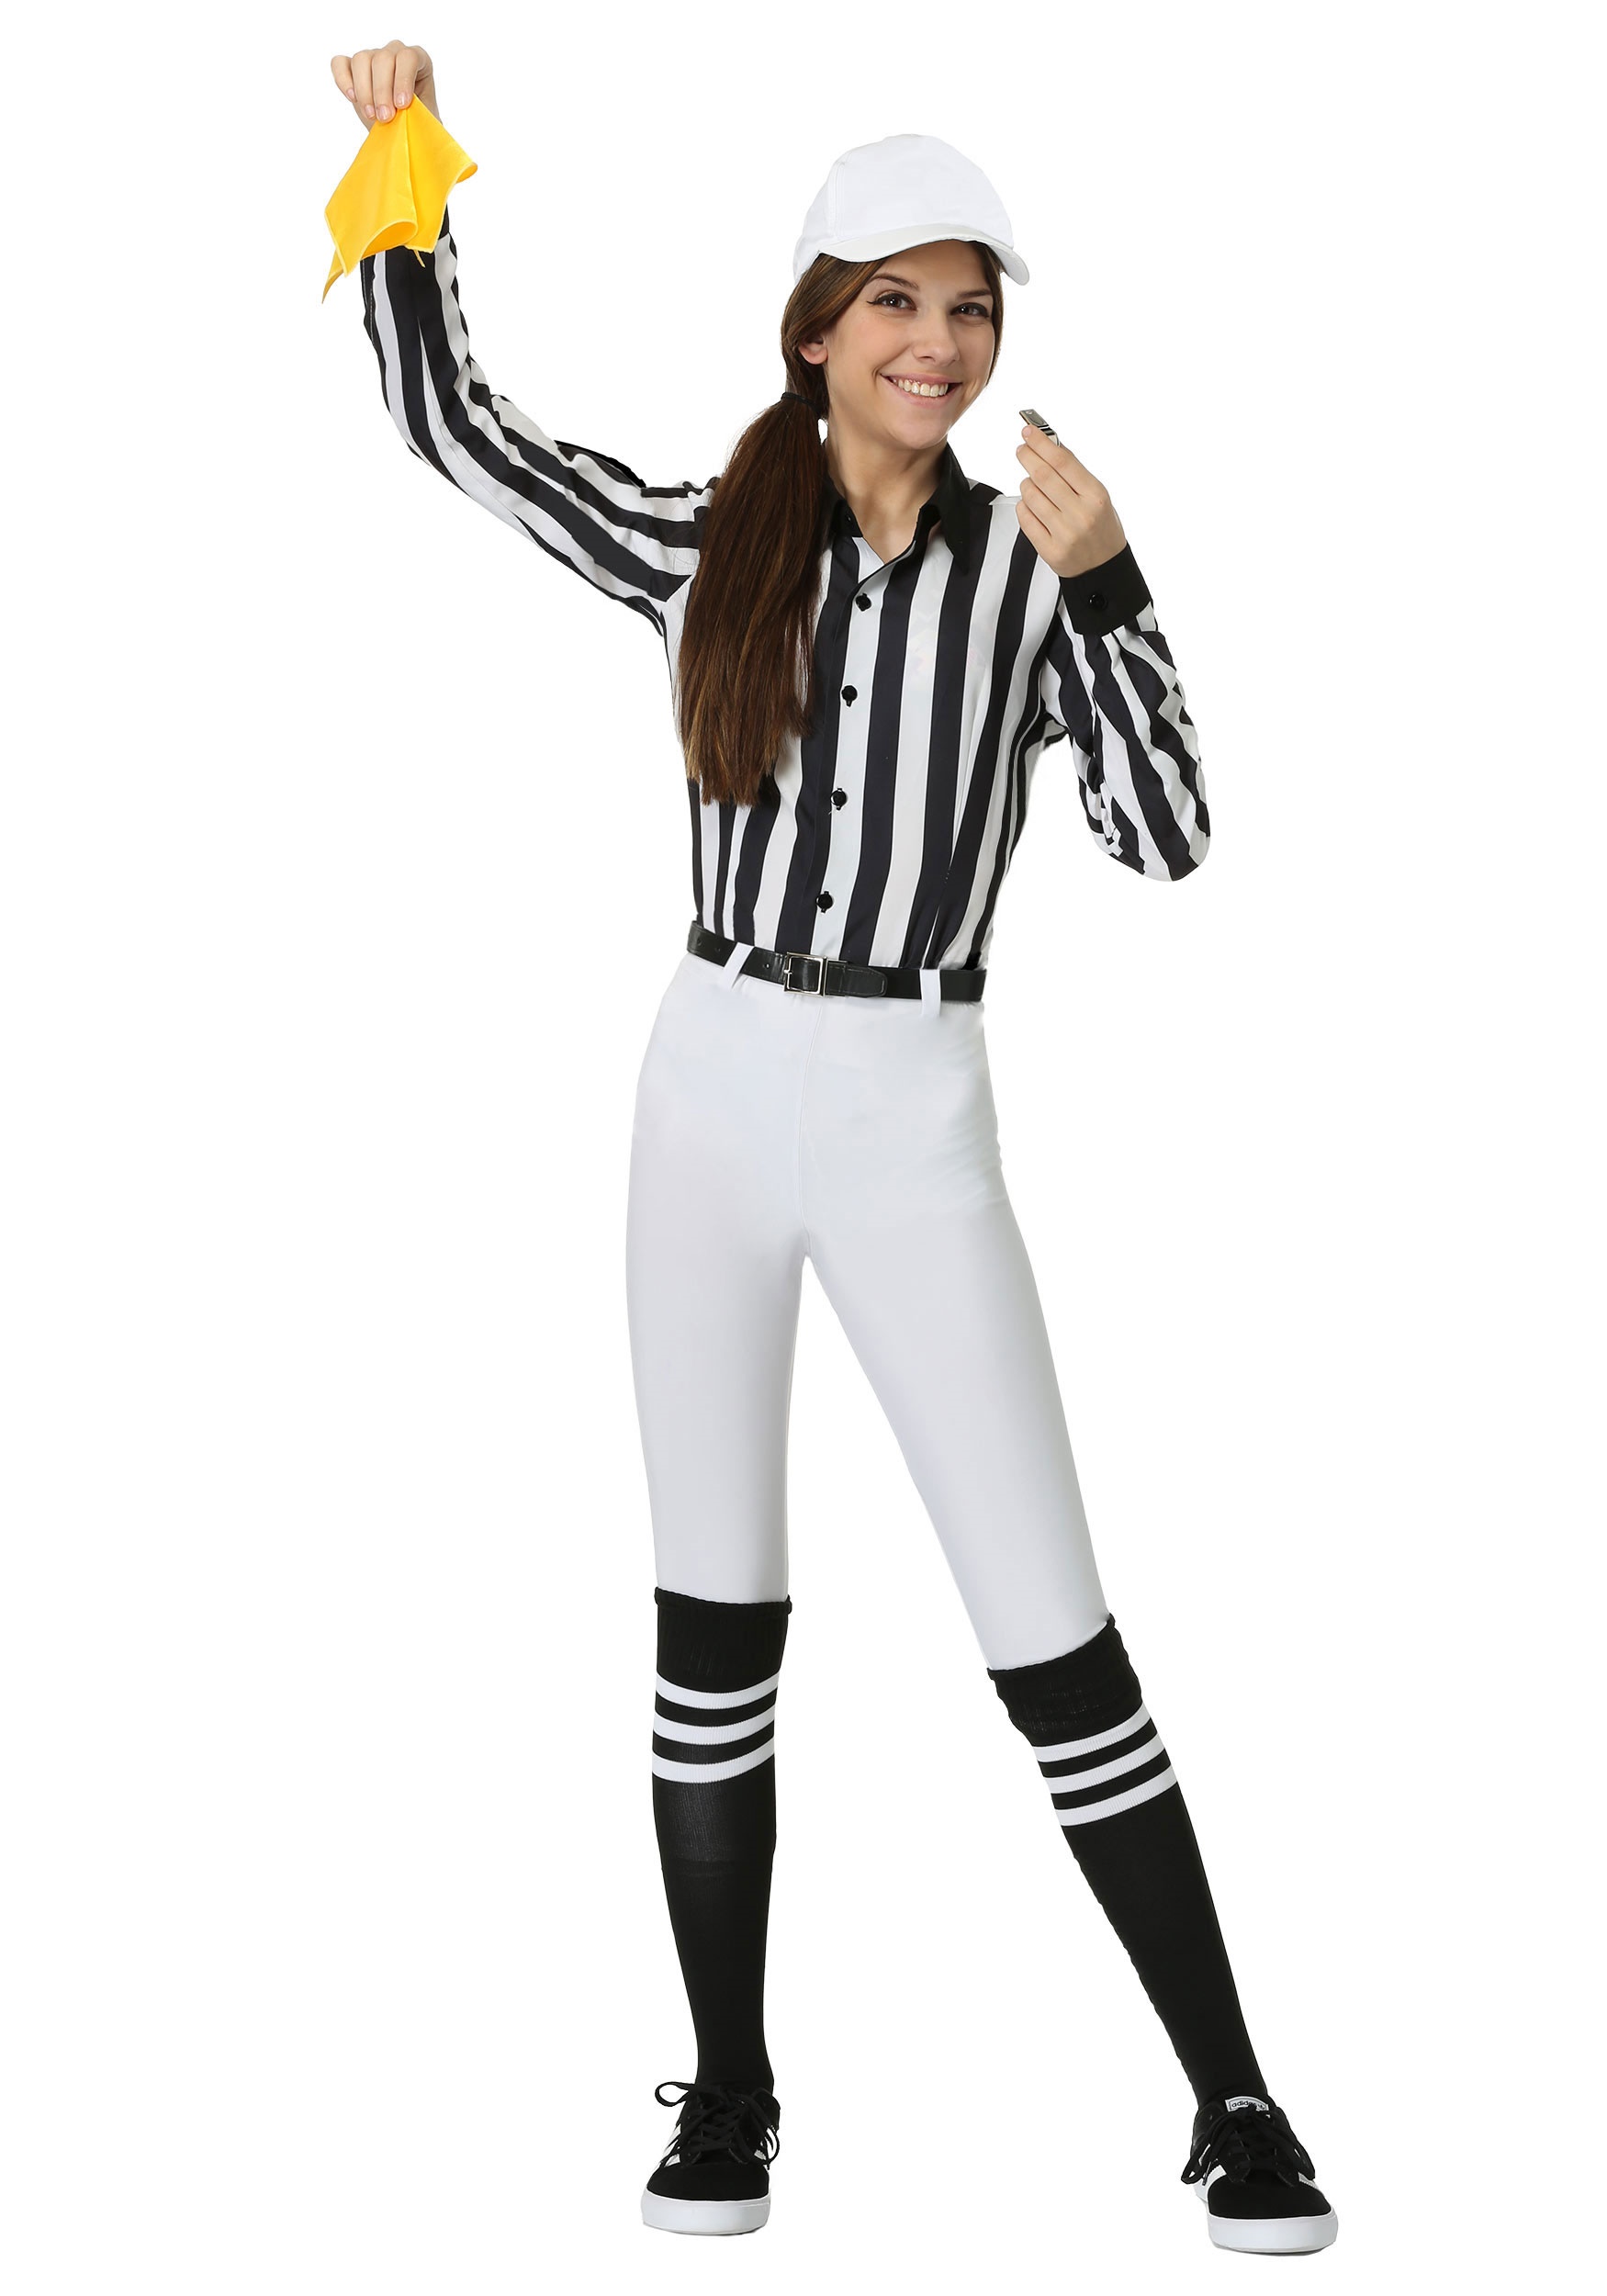 Referee Adult Black and White Costume Shirt and Hat Standard Size Adult